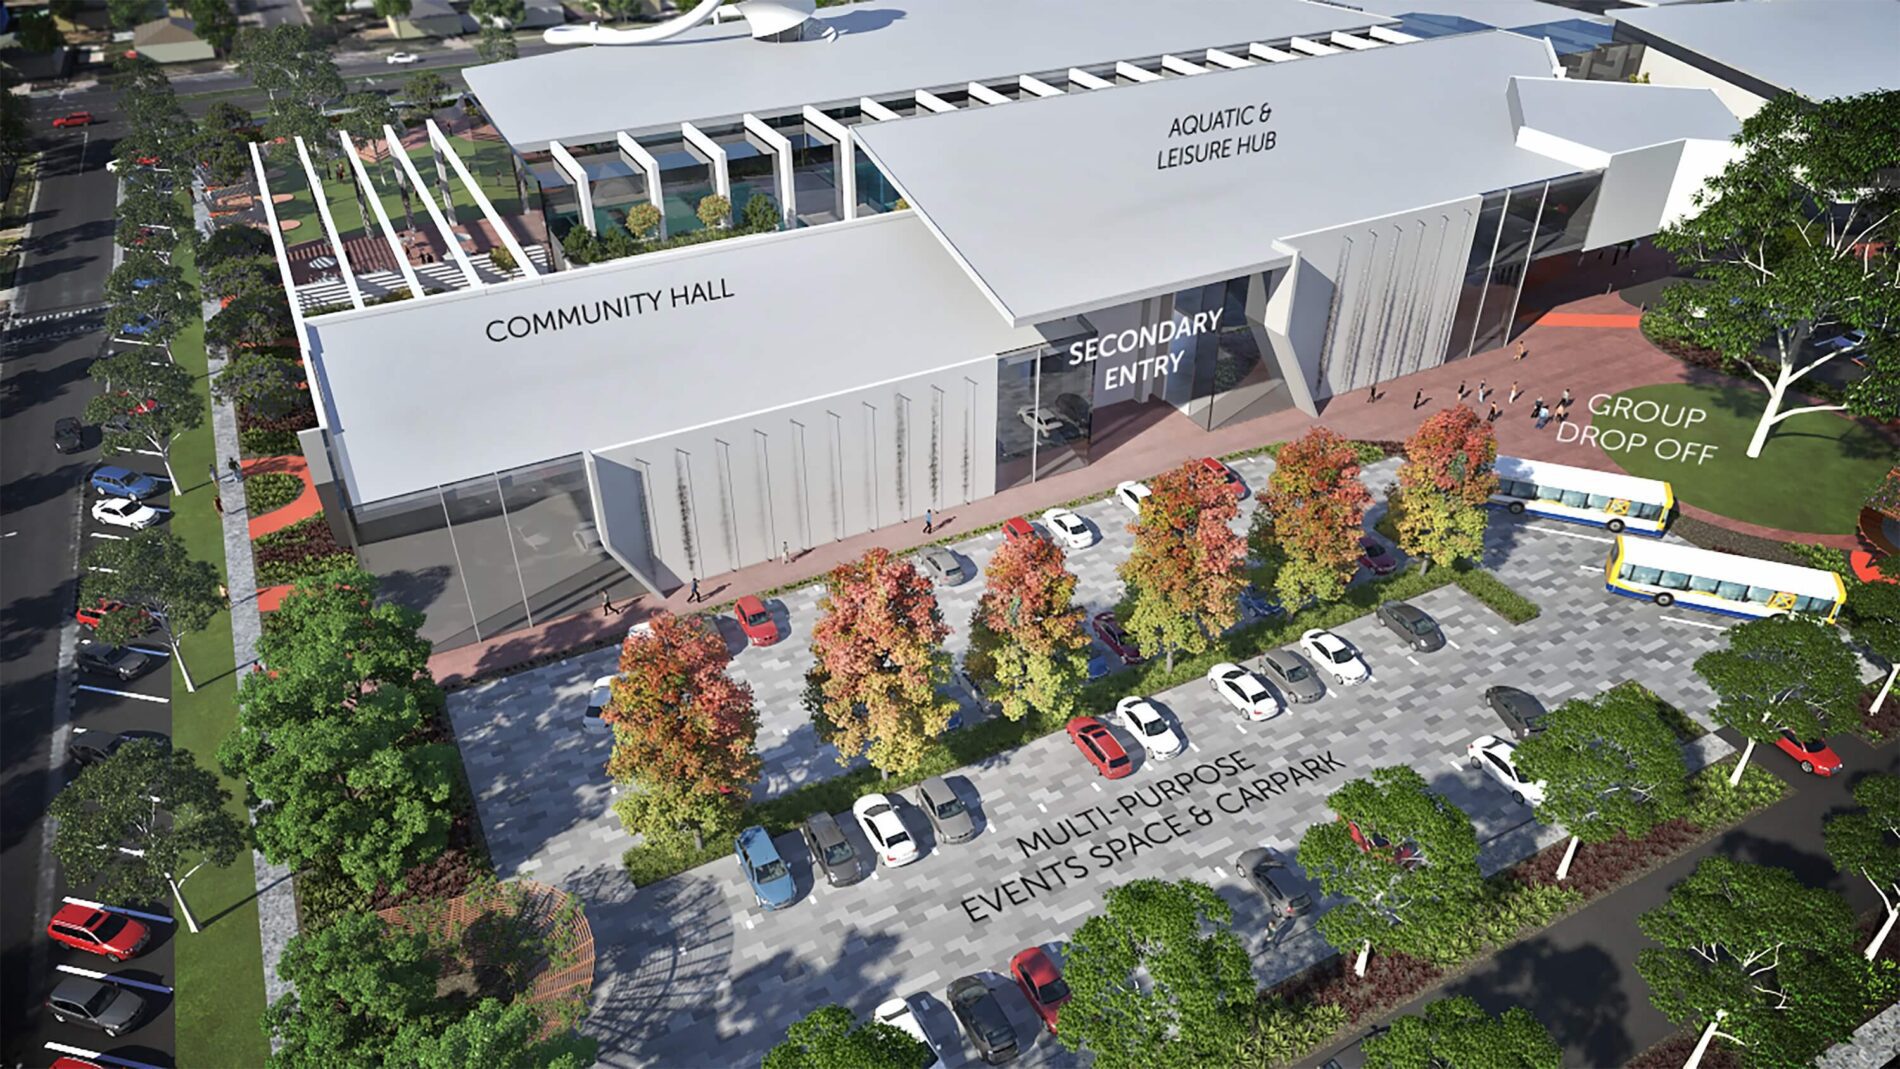 Aerial render of new community hub secondary entry with community hall, aquatic and leisure hub, carparking marked